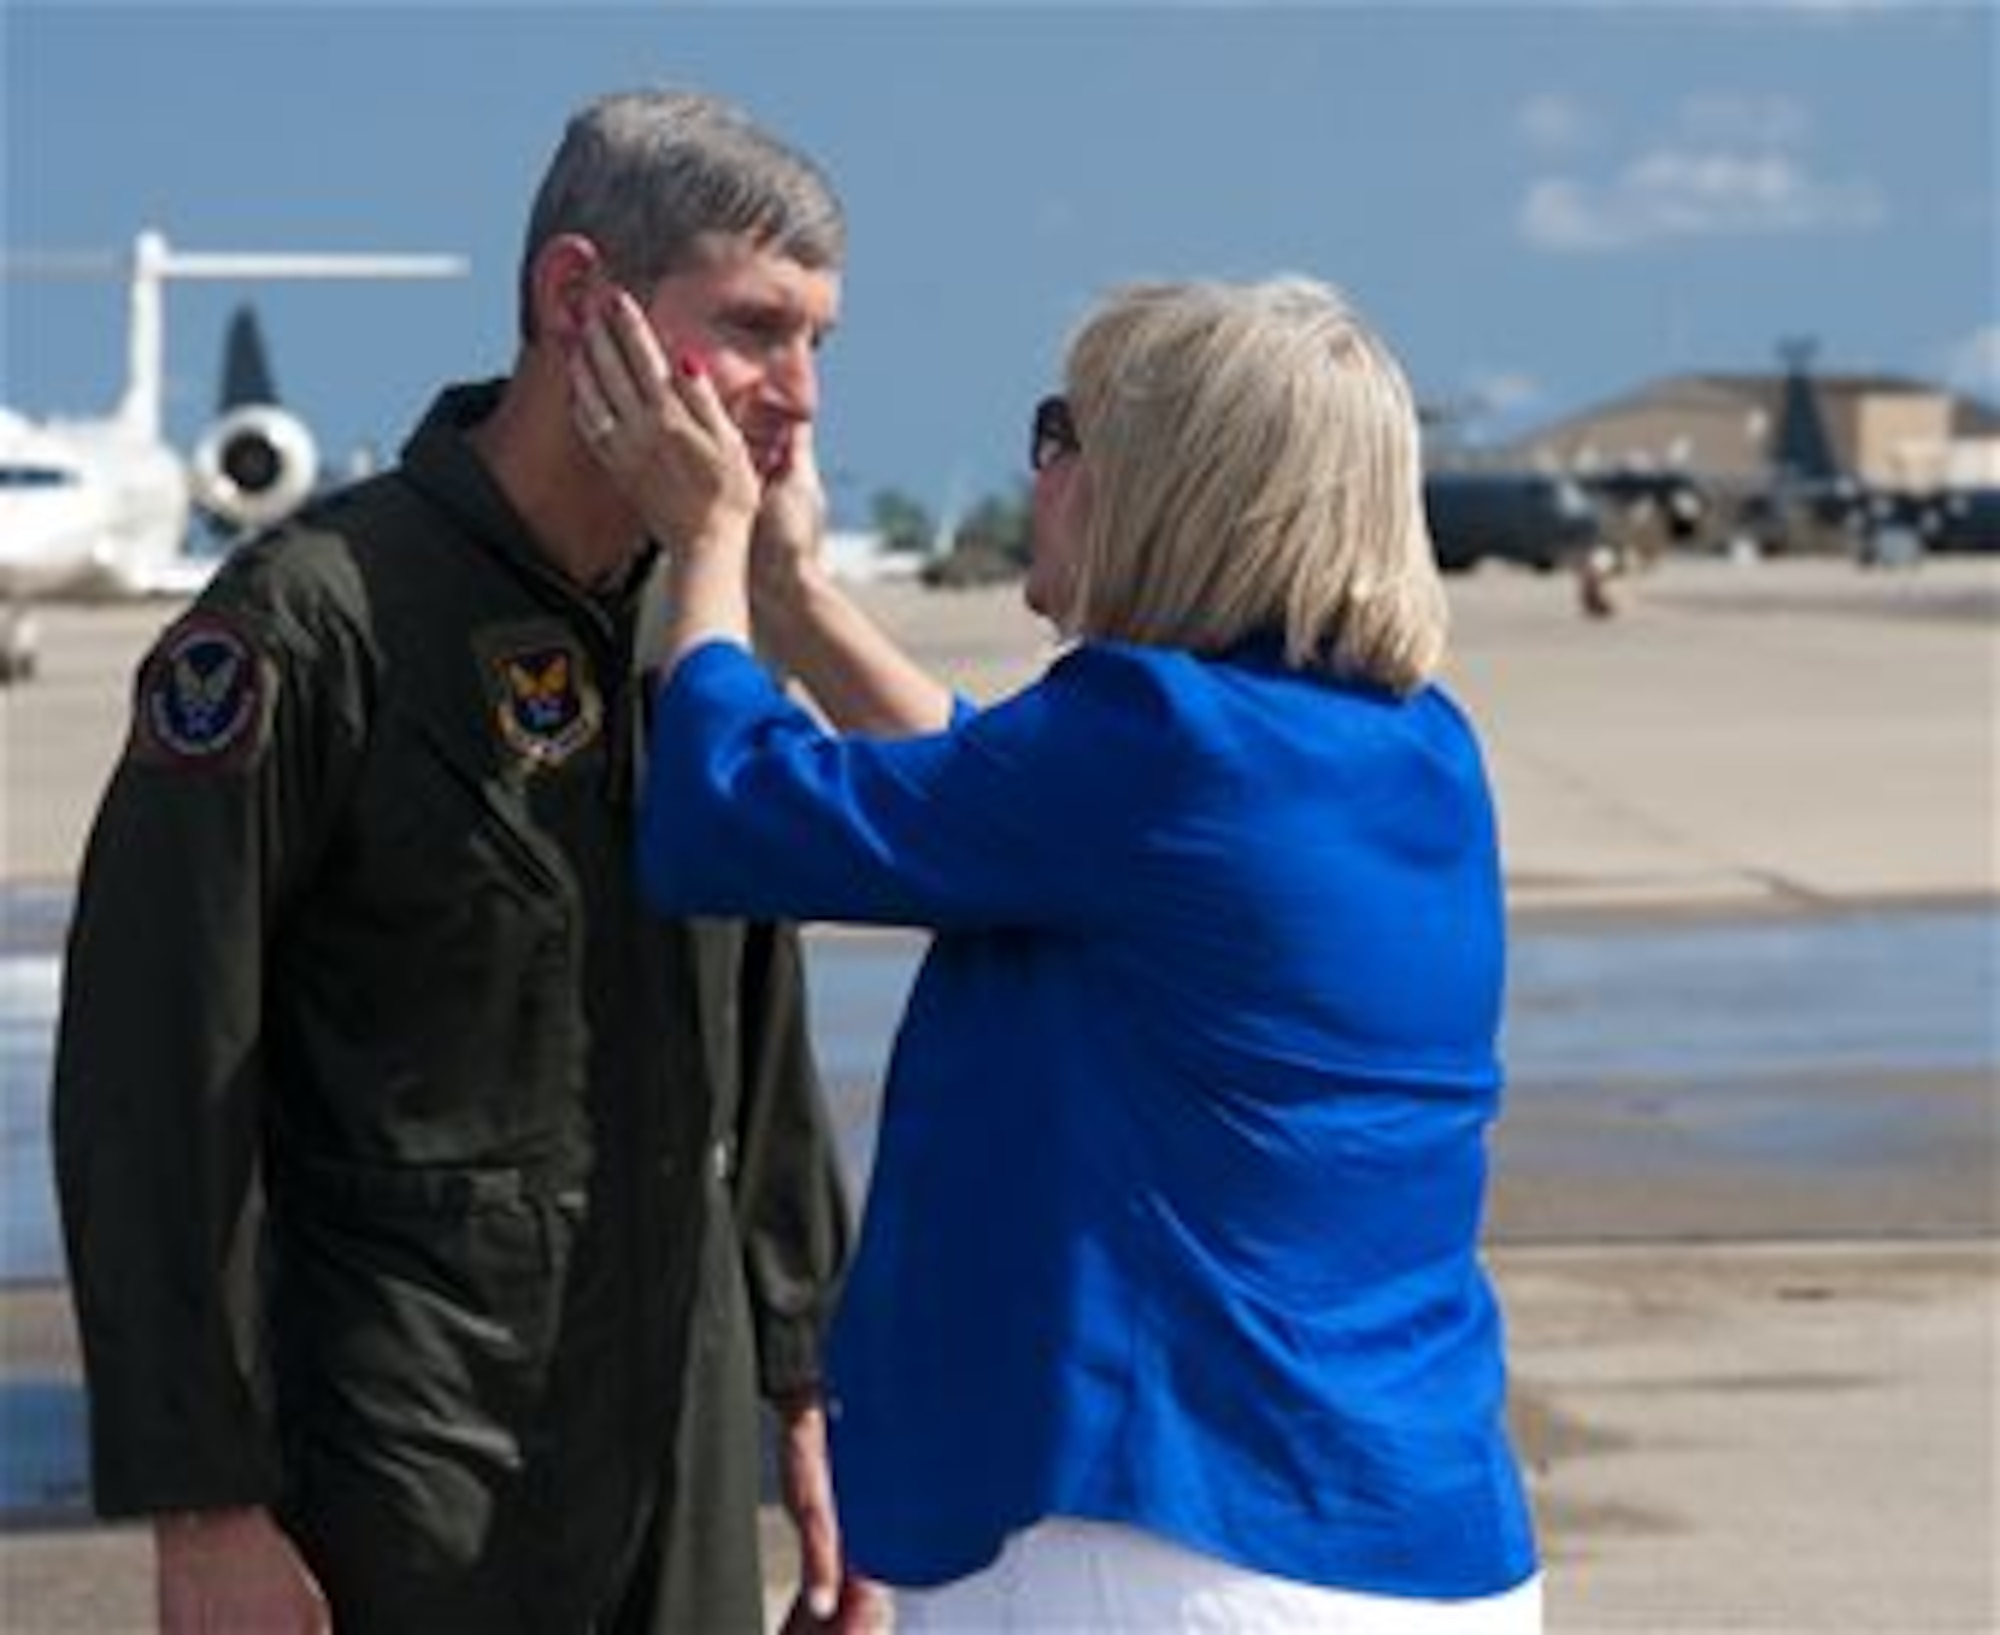 Air Force Chief of Staff Gen. Norton Schwartz is embraced by his wife Susie, following his last flight as an active duty officer on an MC-130E Combat Talon I, at Hurlburt Field, Fla., July 12, 2012. The MC-130E crew conducted a local training sortie during the mission. It also served as Schwartz's "fini flight" in the Air Force. (U.S. Air Force photo/Airman 1st Class Christopher Williams)